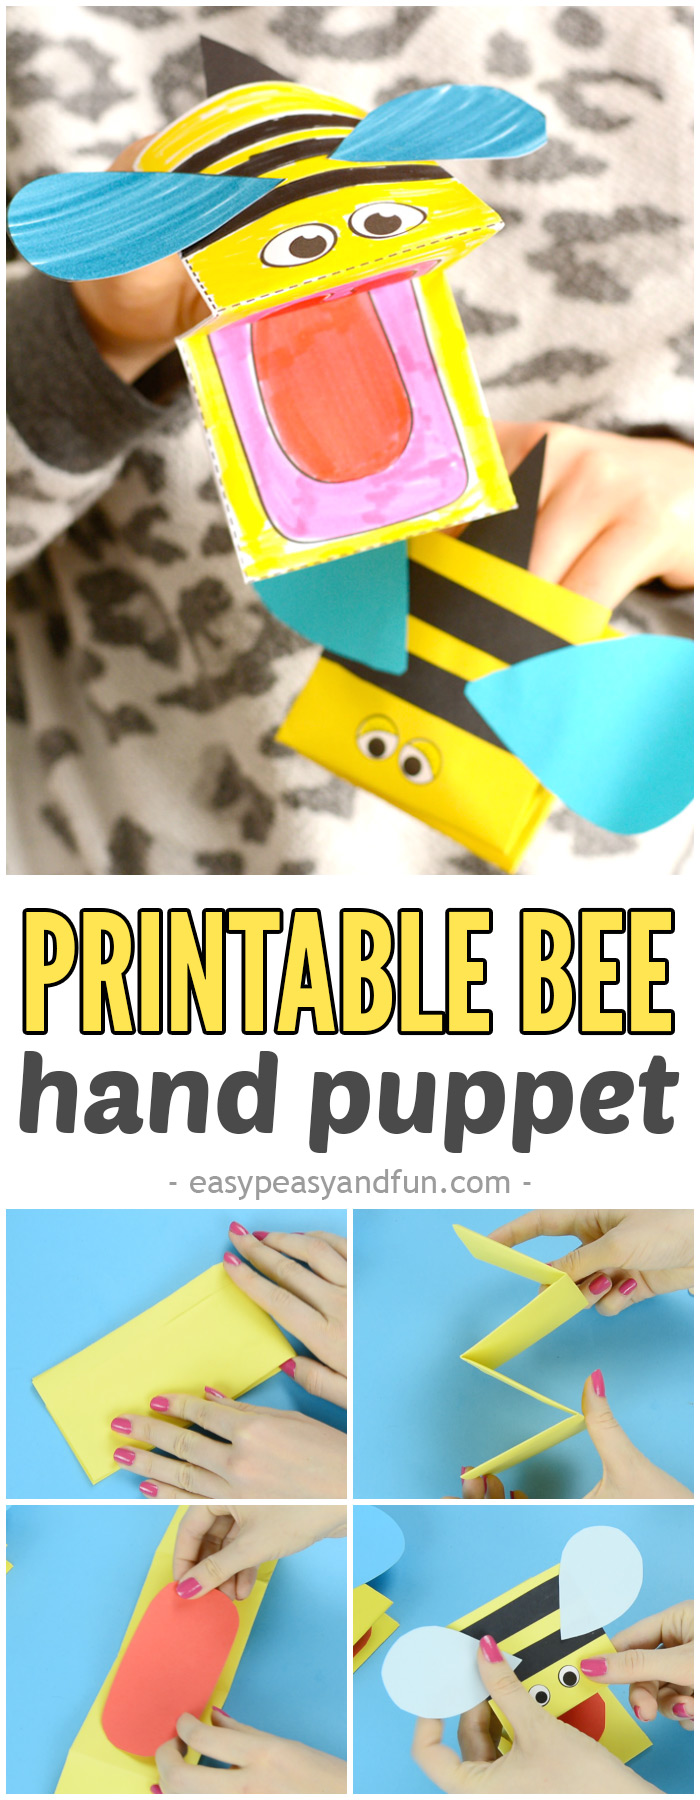 Paper crafts with printable bee puppets to make for children